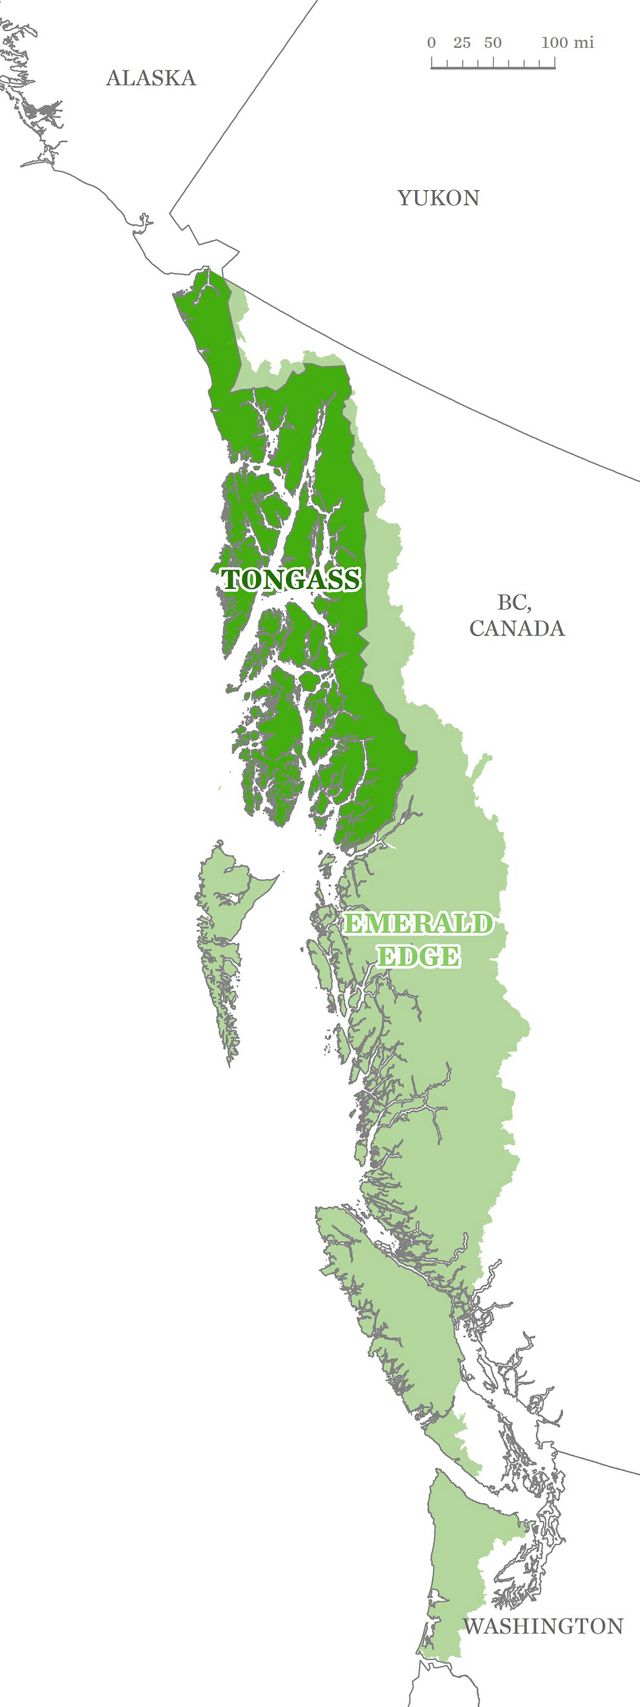 Map showing Tongass National Forest and Emerald Edge areas of SE Alaska.